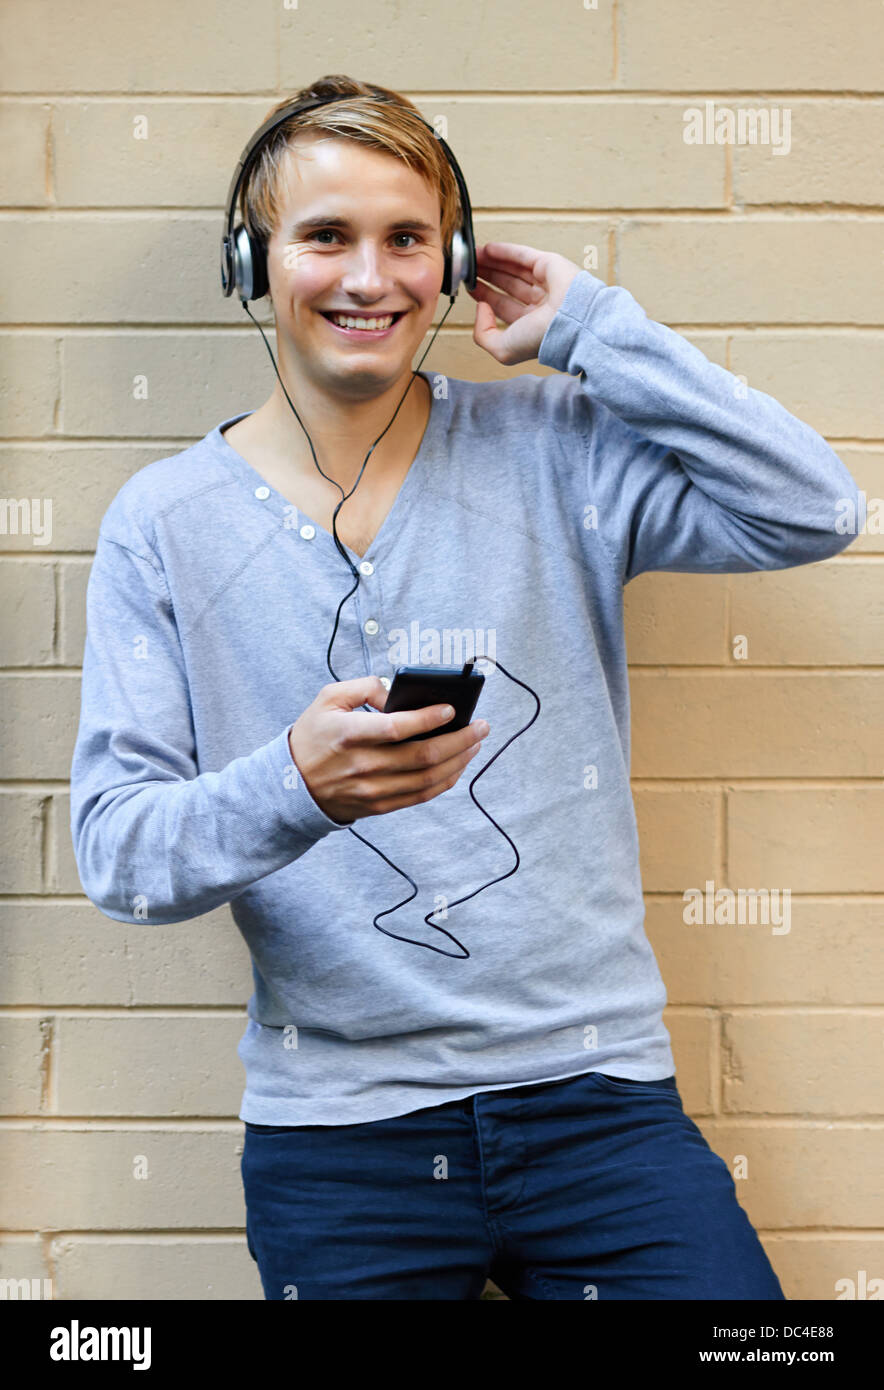 Young male listening to music on phone Stock Photo